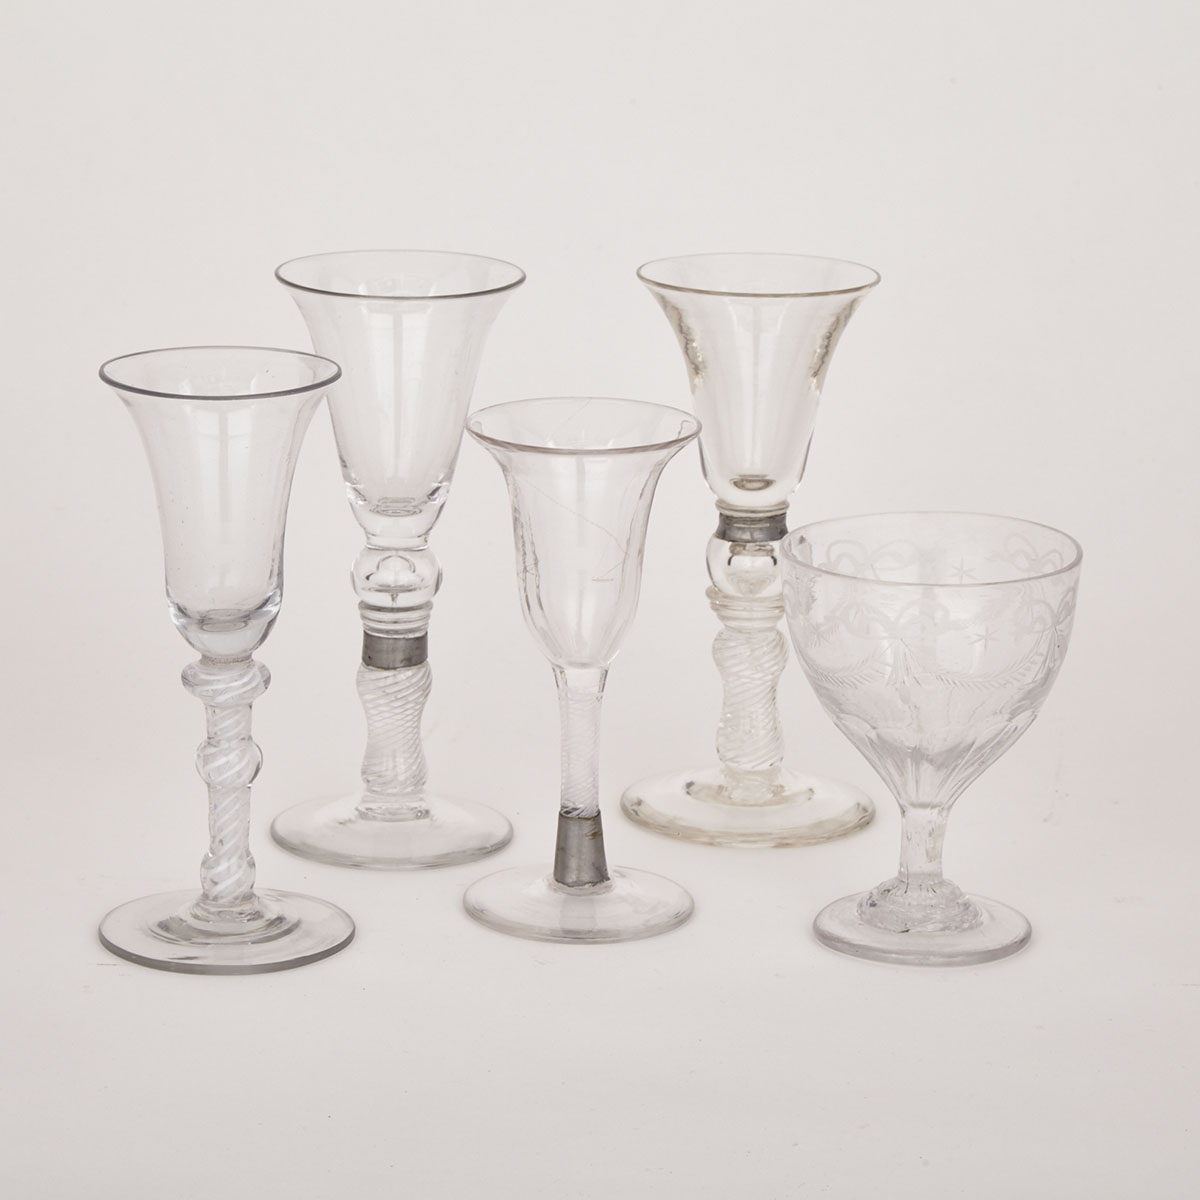 Miscellaneous Lot of  English Glass Including Three With Tin Collar ‘Make Do’ Repairs, 18th century